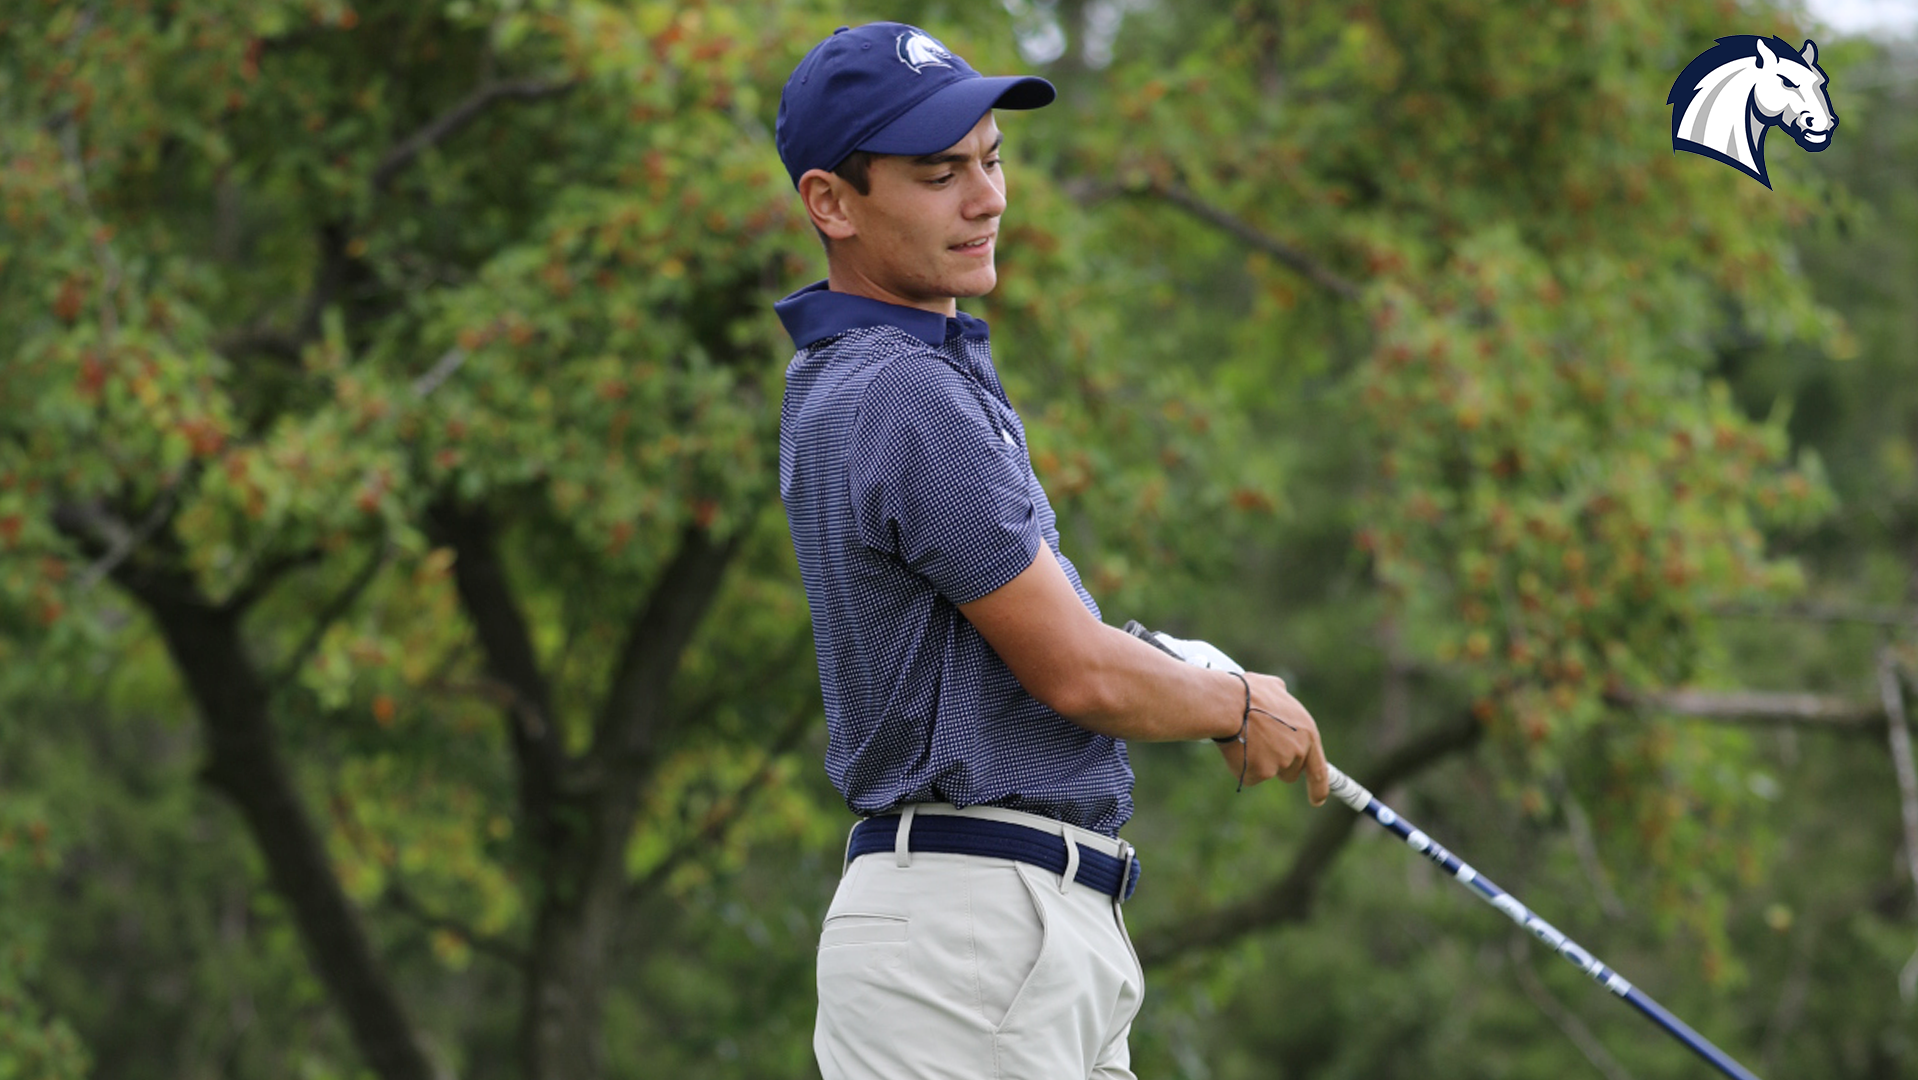 Chargers rally to take fifth at Ralph Hargett Memorial with strong final round